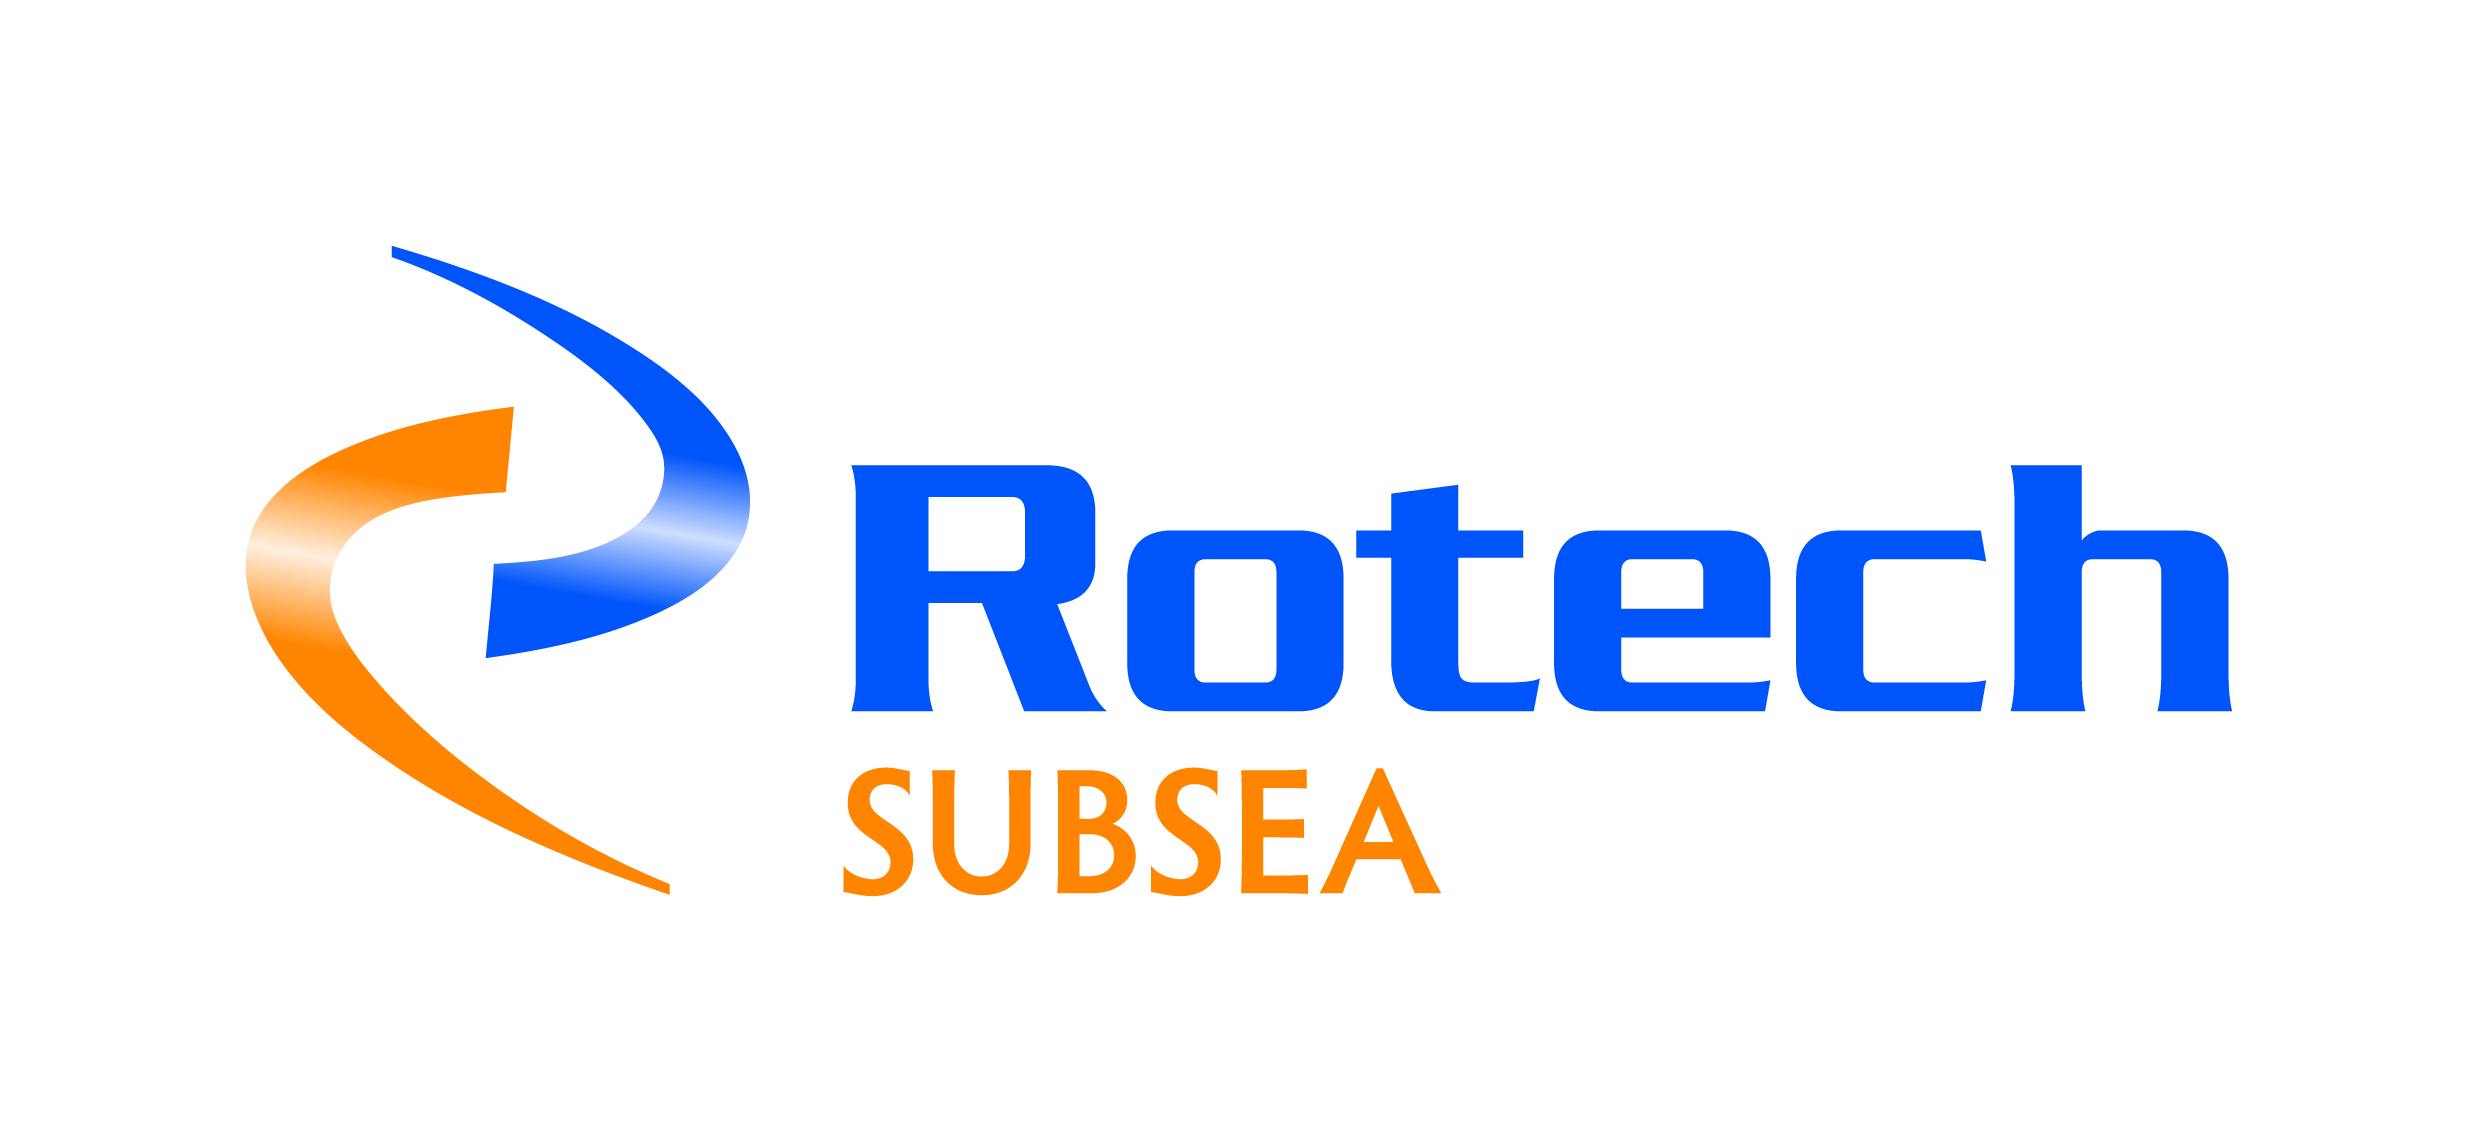 1 Rotech 2015 Subsea CMYK